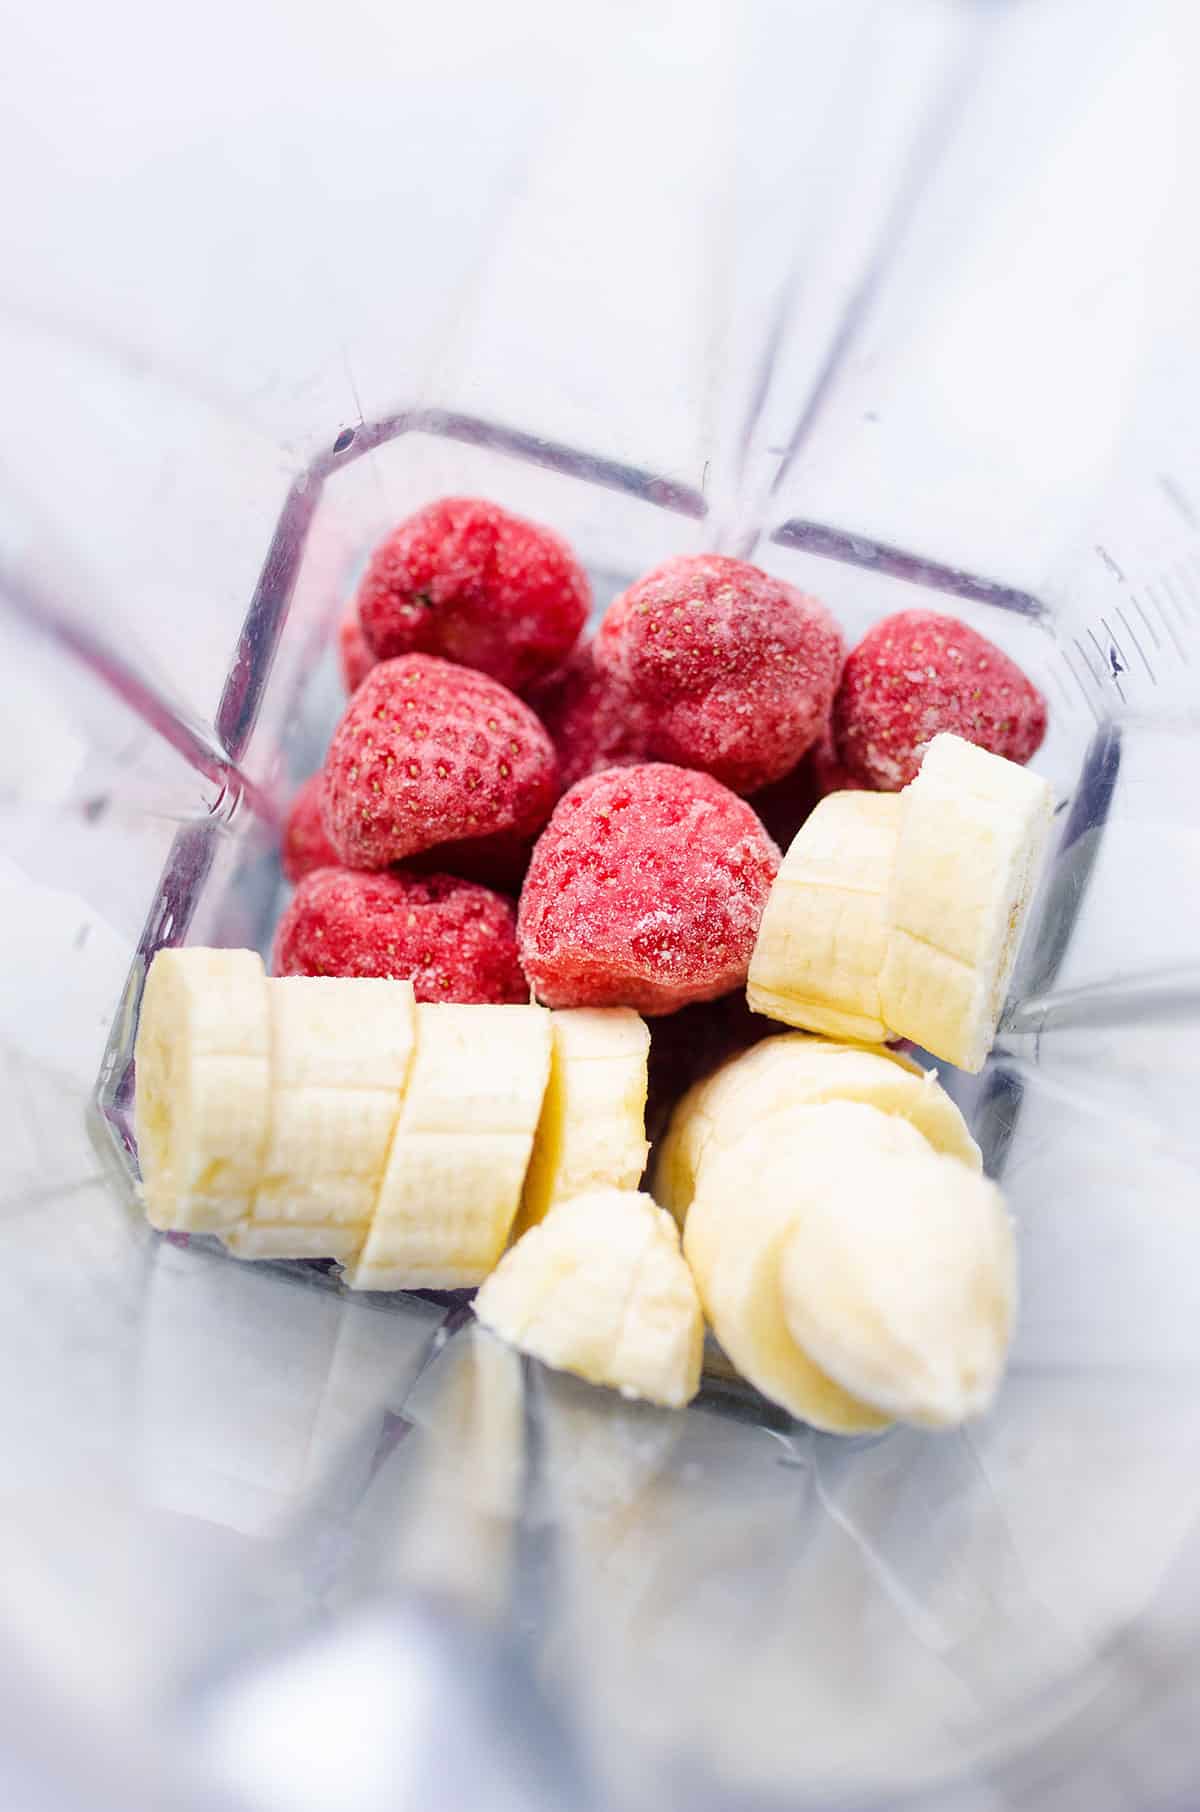 Frozen strawberries and bananas in a blender.